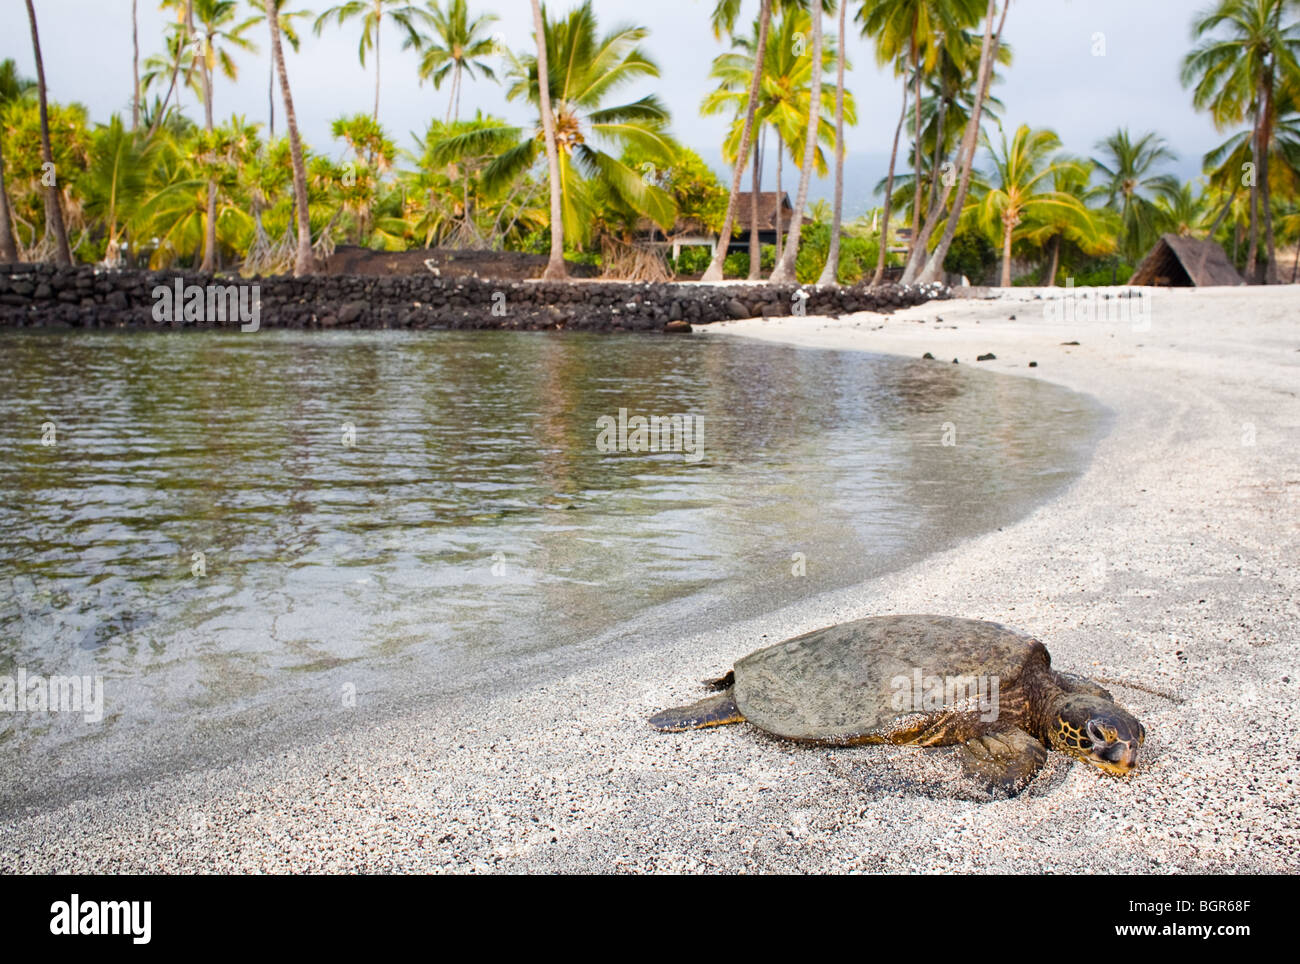 A Sea Turtle rests on a beach in Hawaii Stock Photo